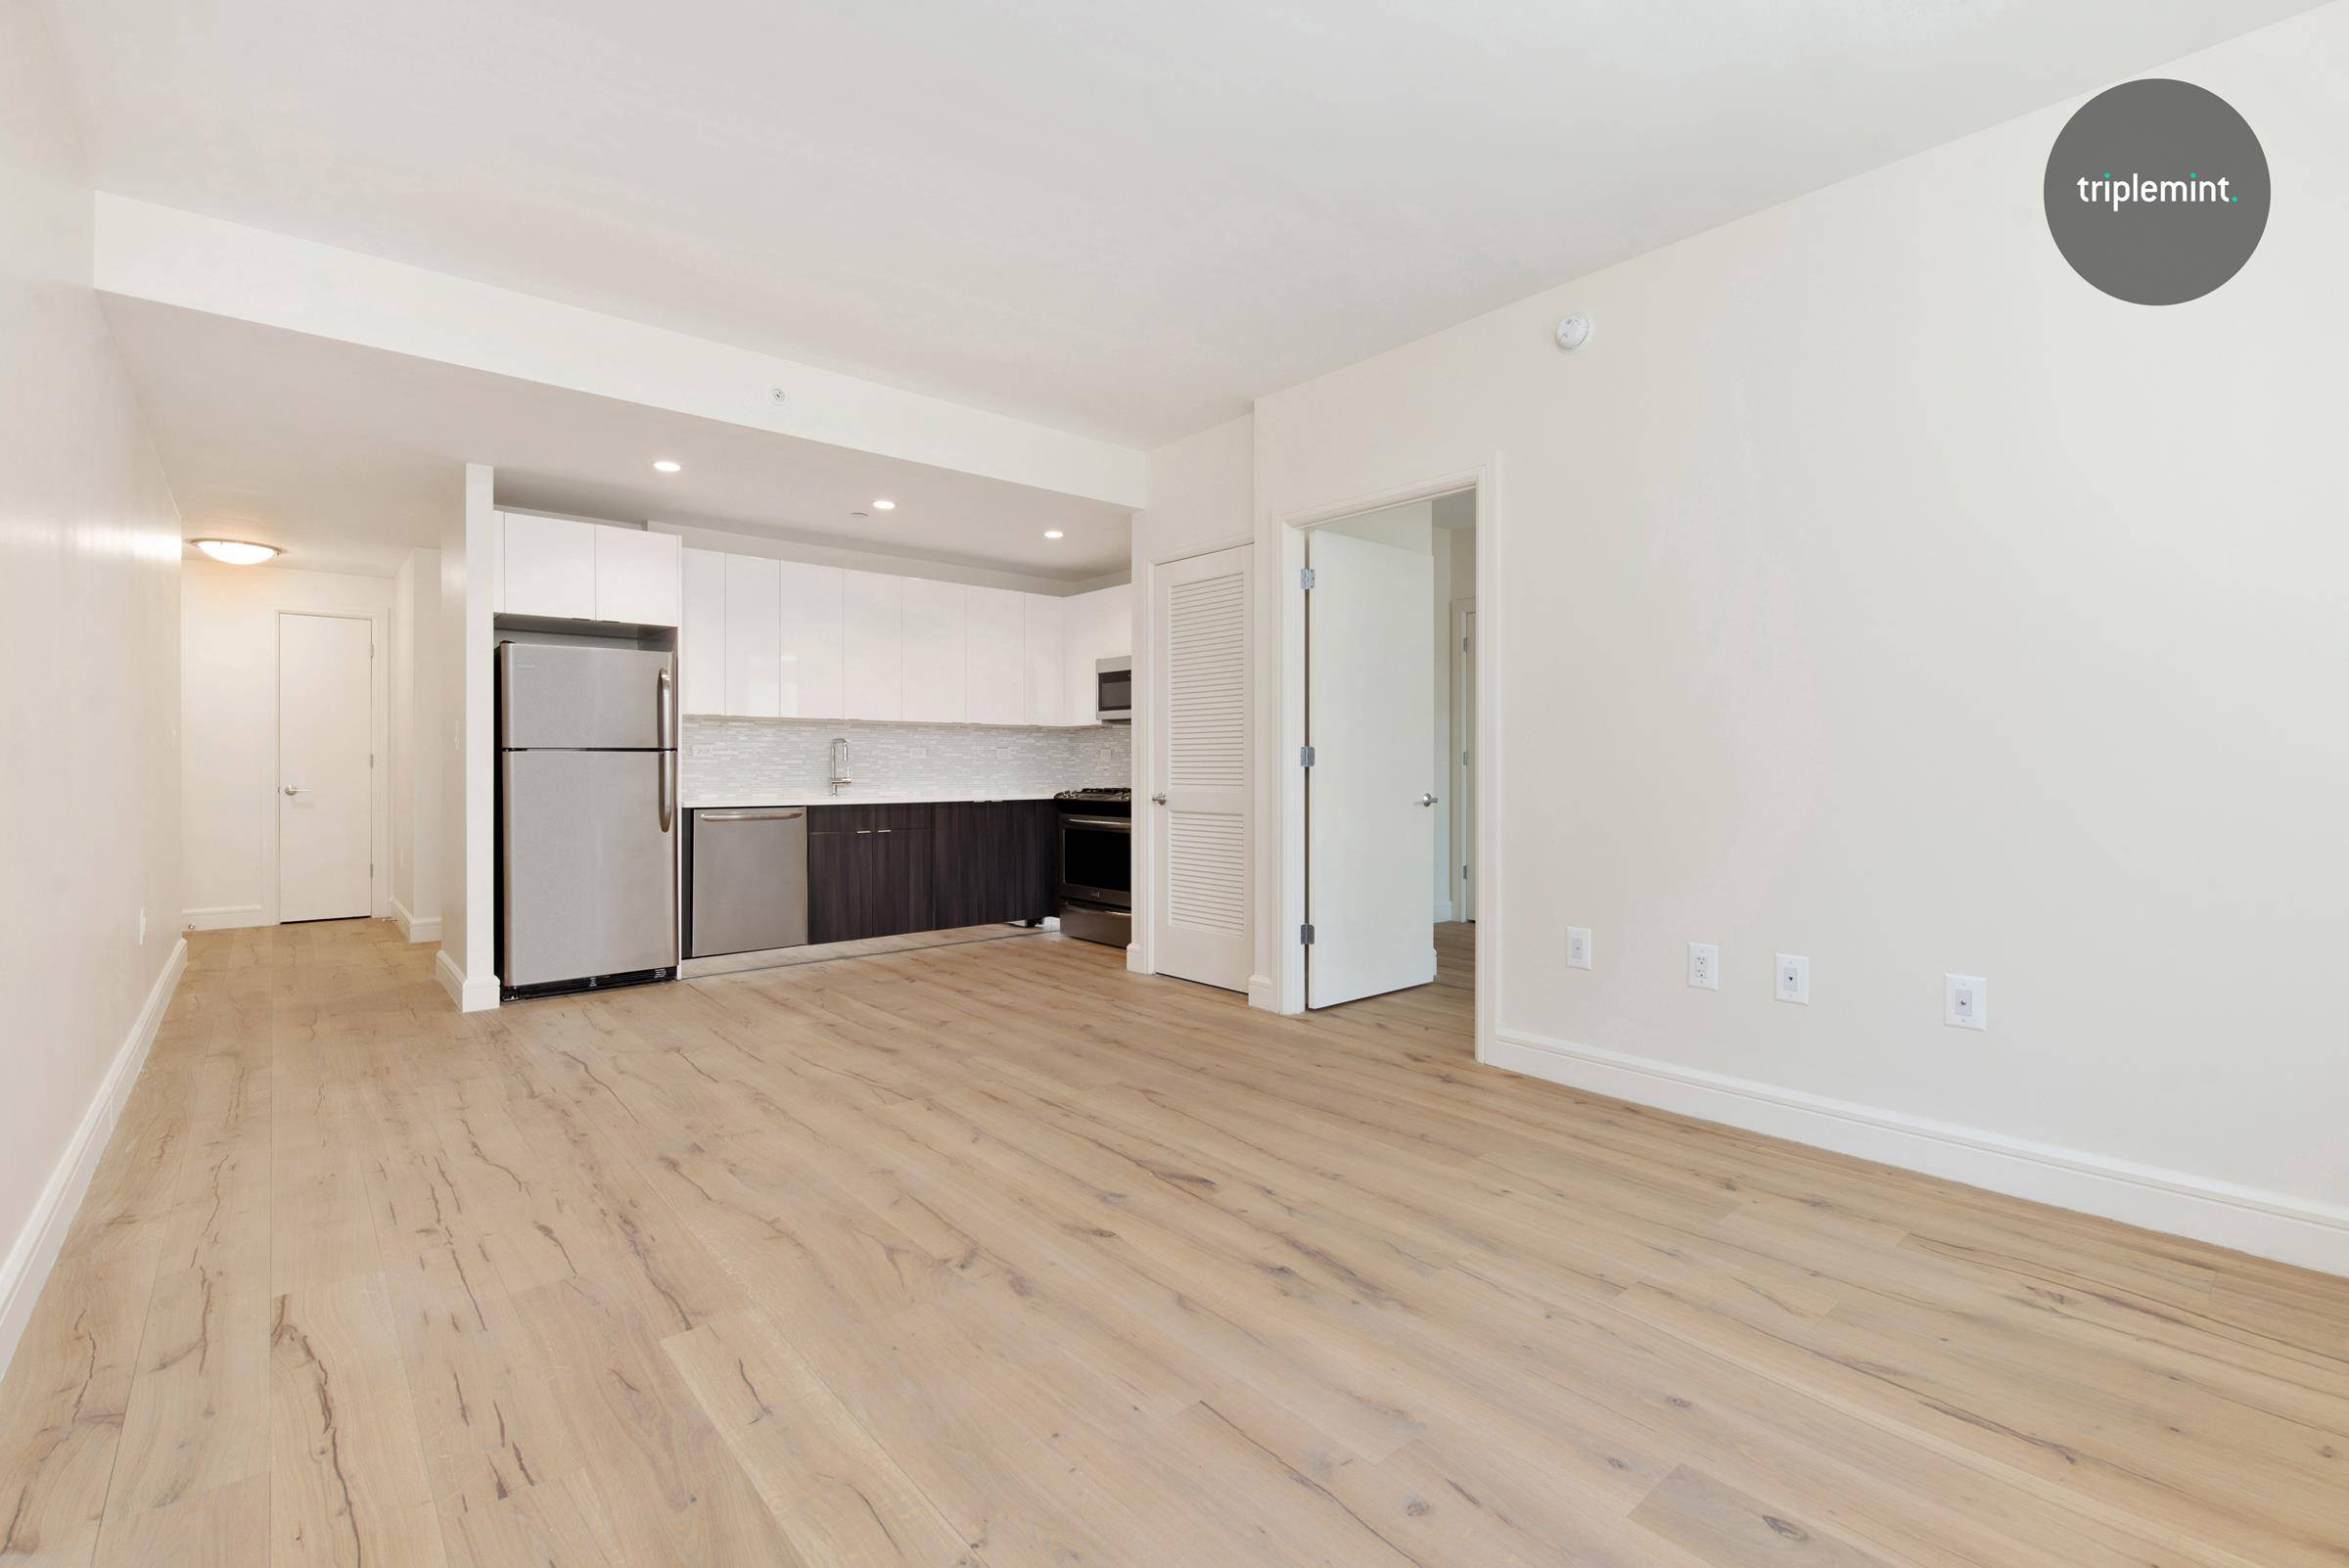 This brand new, never lived in two bedroom, two bathroom apartment is located in the heart of Long Island City with a gorgeous private terrace.